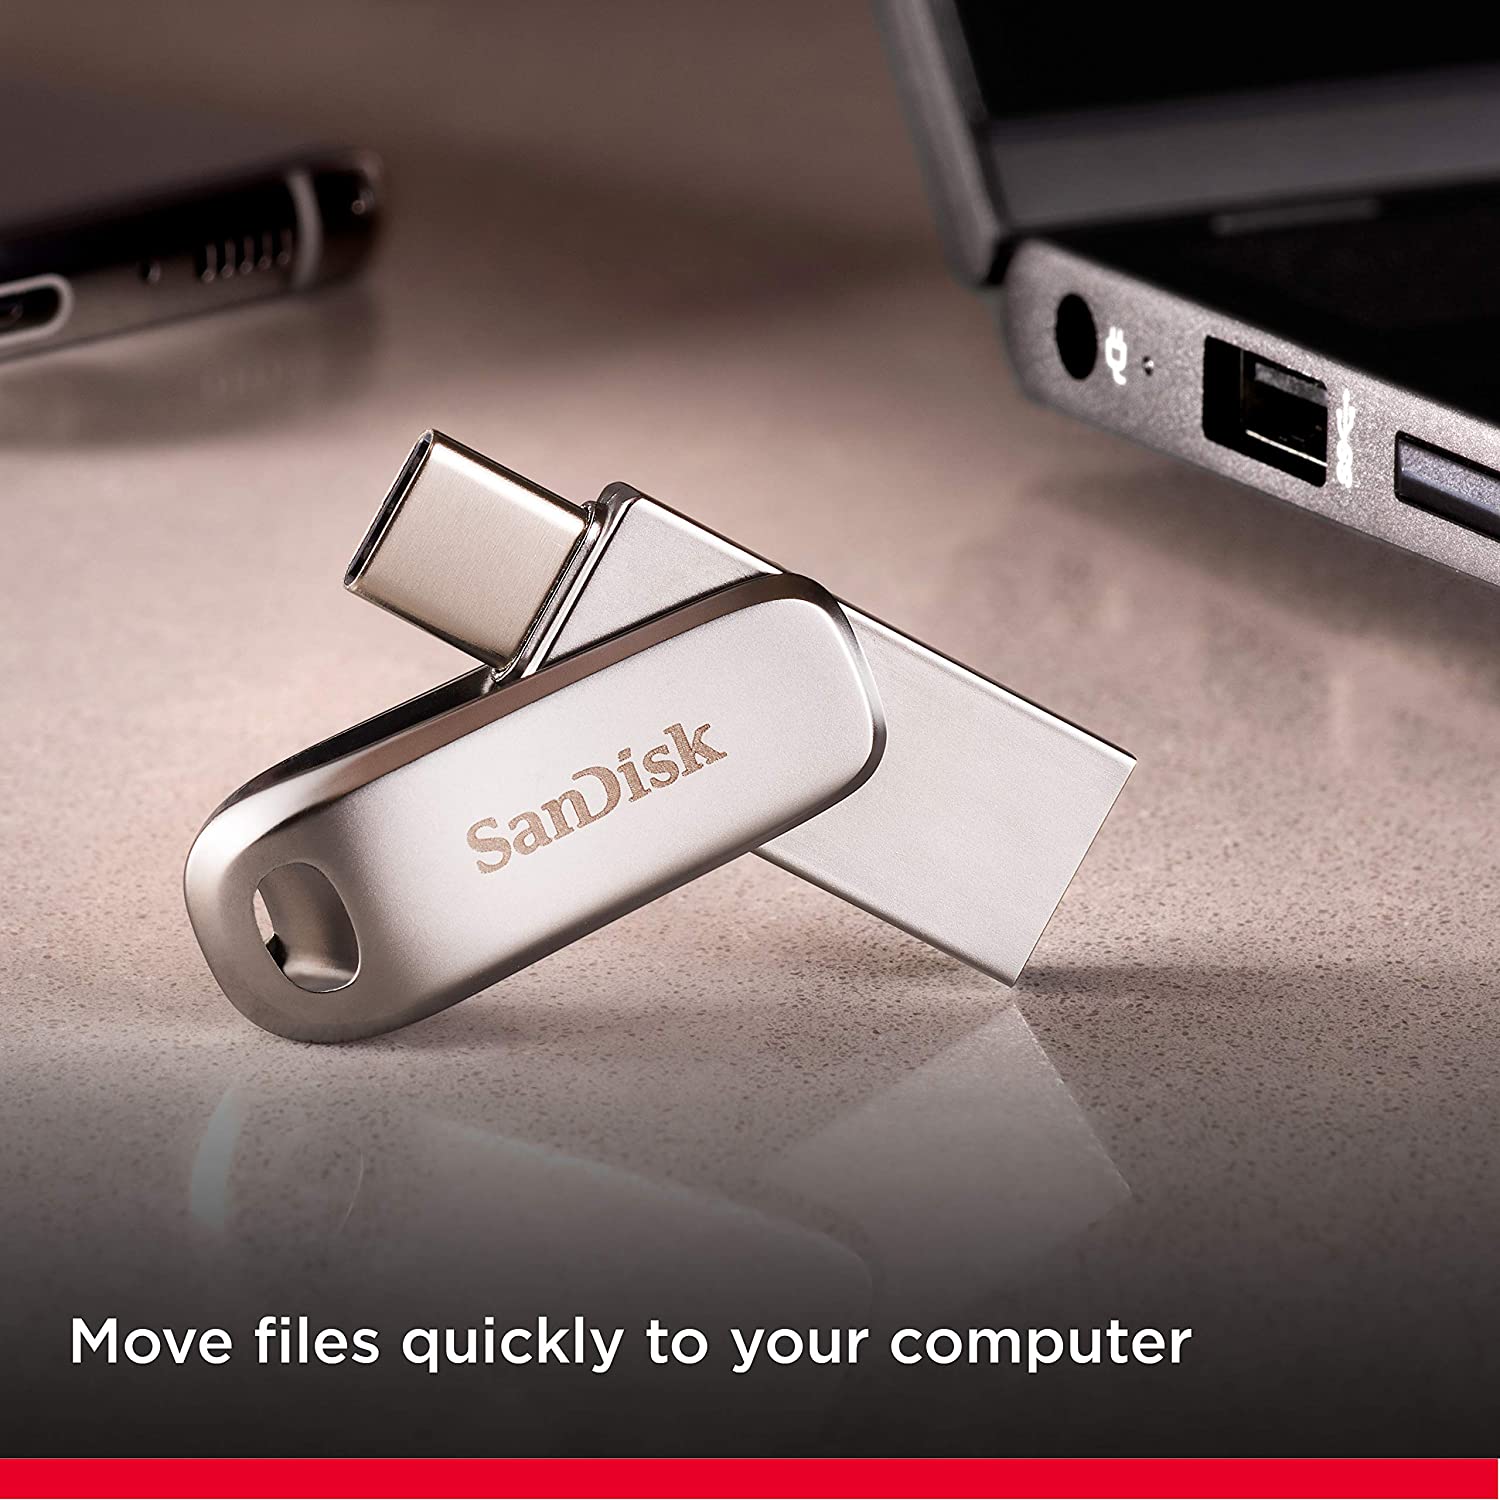 Can a flash drive be partitioned